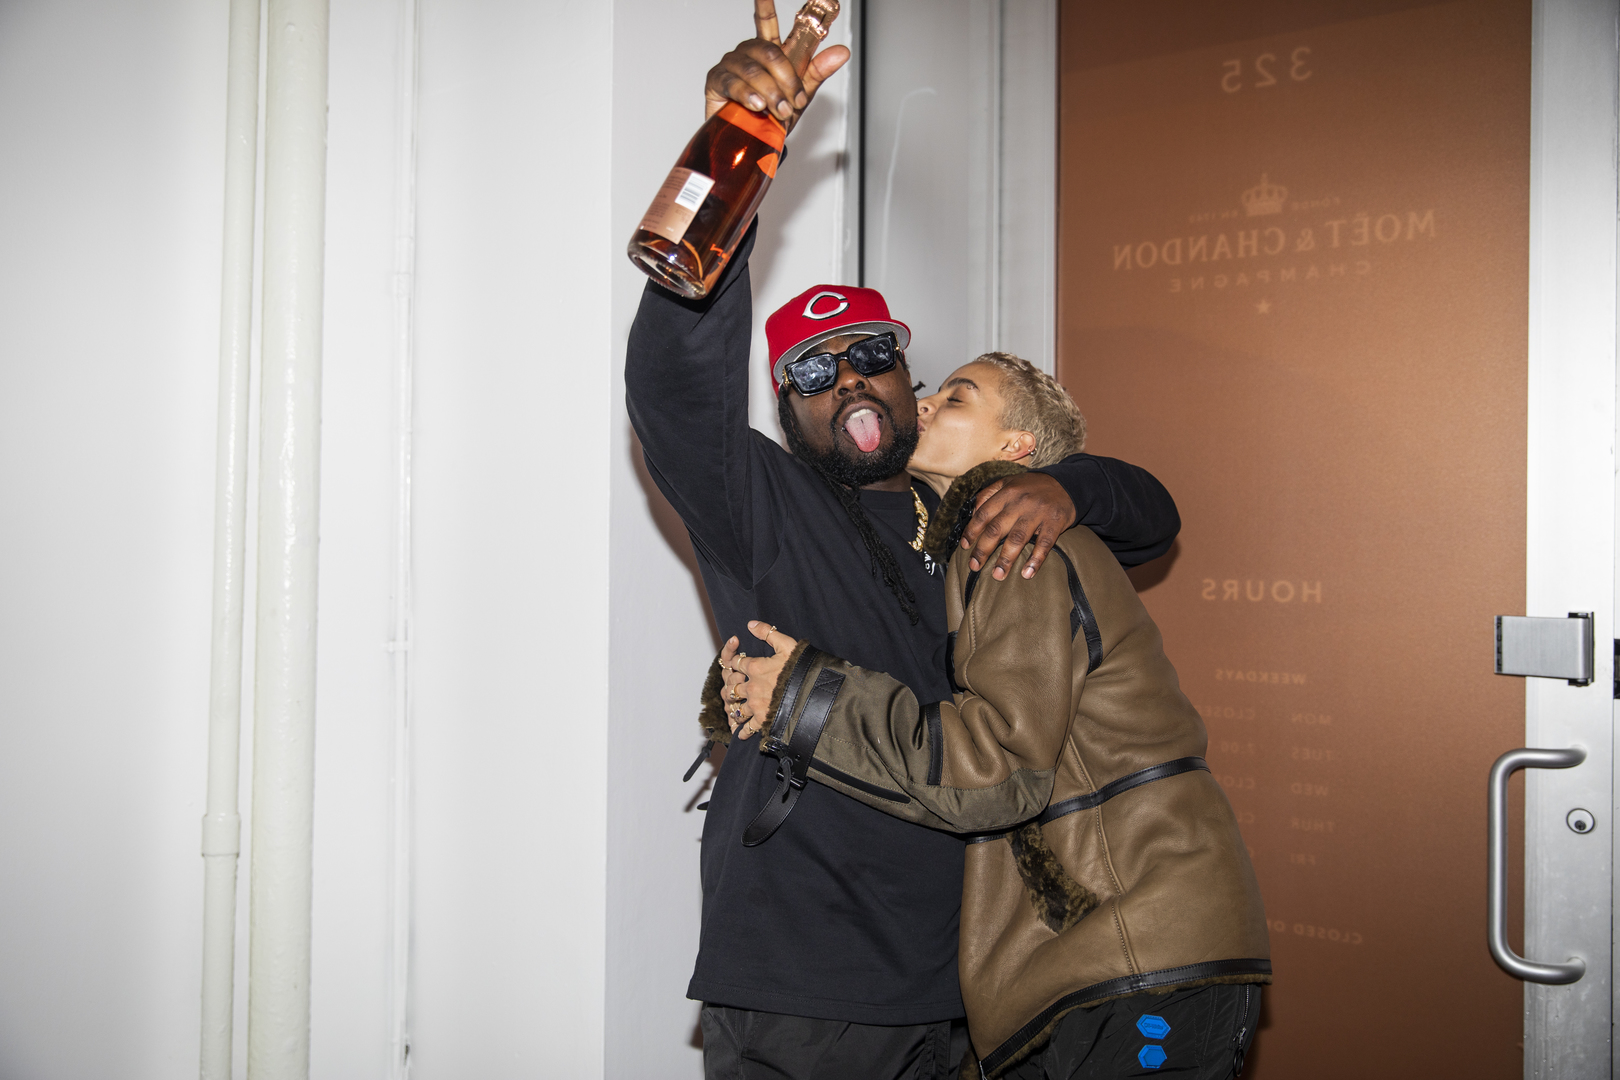 Moet Chandon Dinner featuring Jonathan Mannion, Wale, Lil Kim and LaQuan Smith